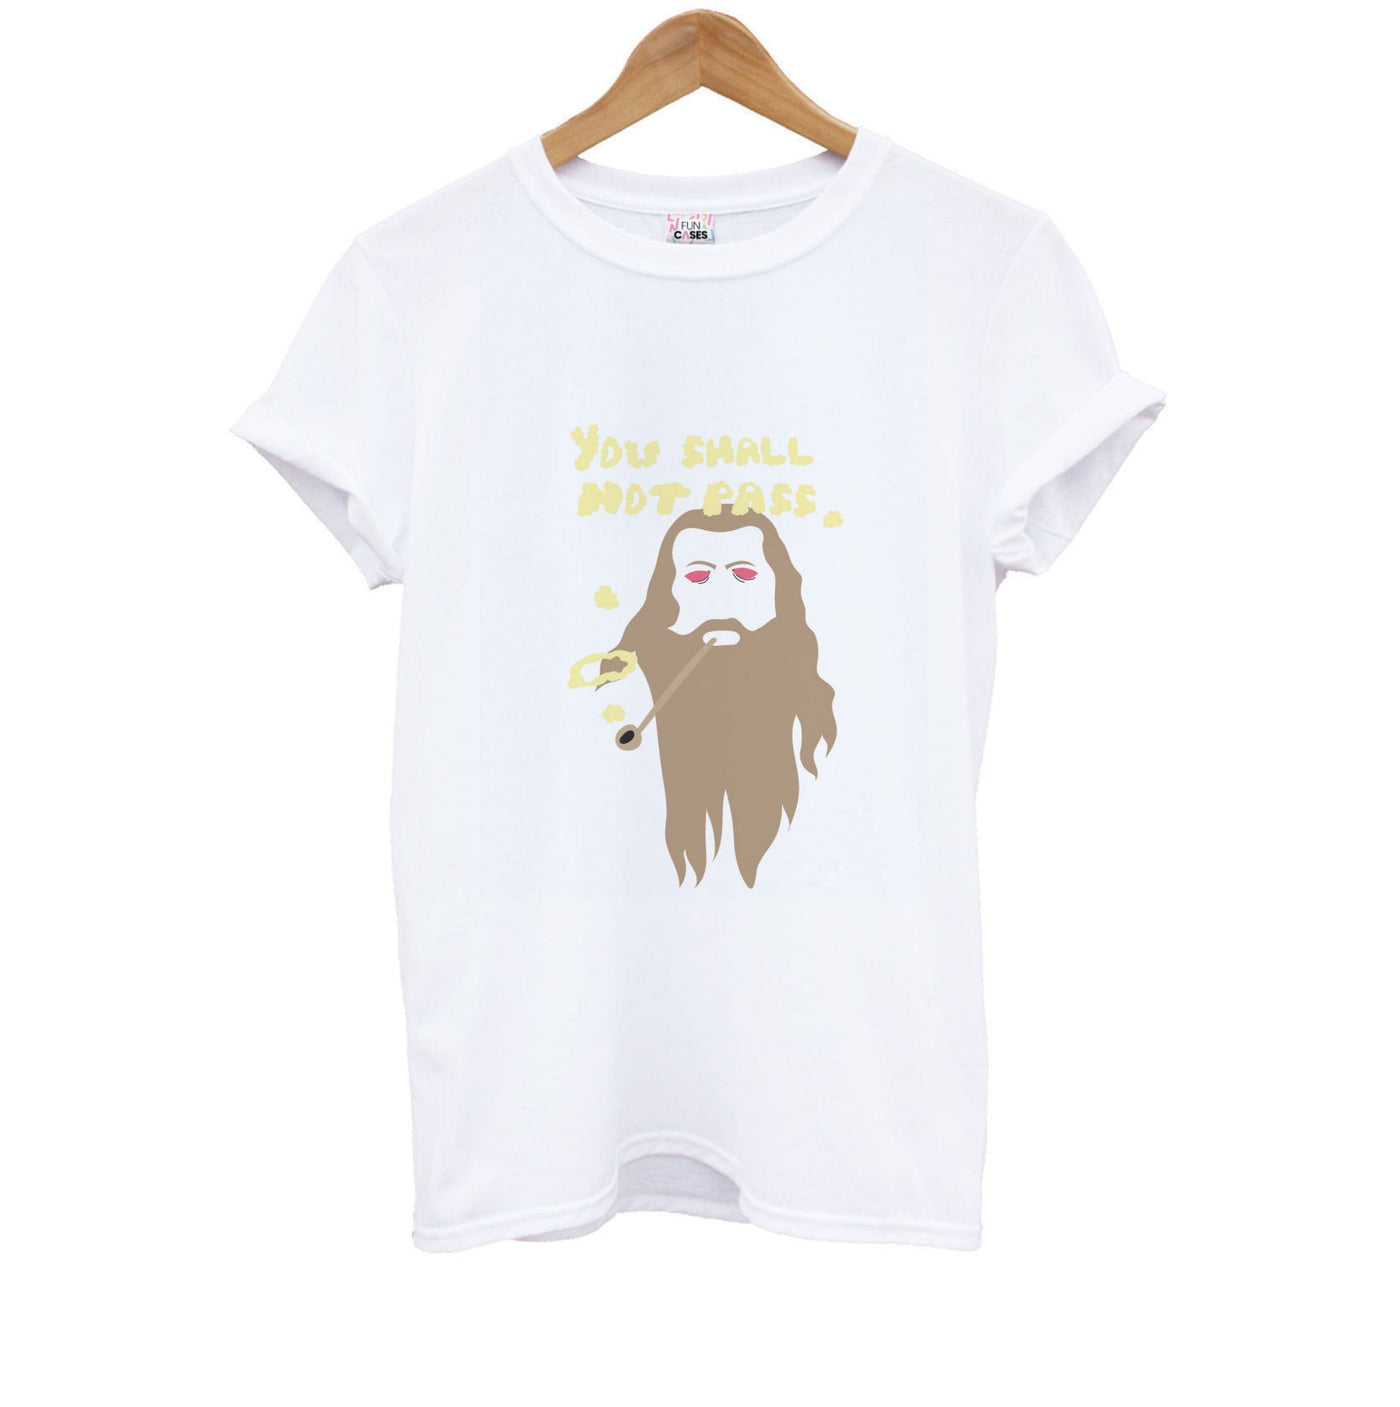 You Shall Not Pass - Lord Of The Rings Kids T-Shirt